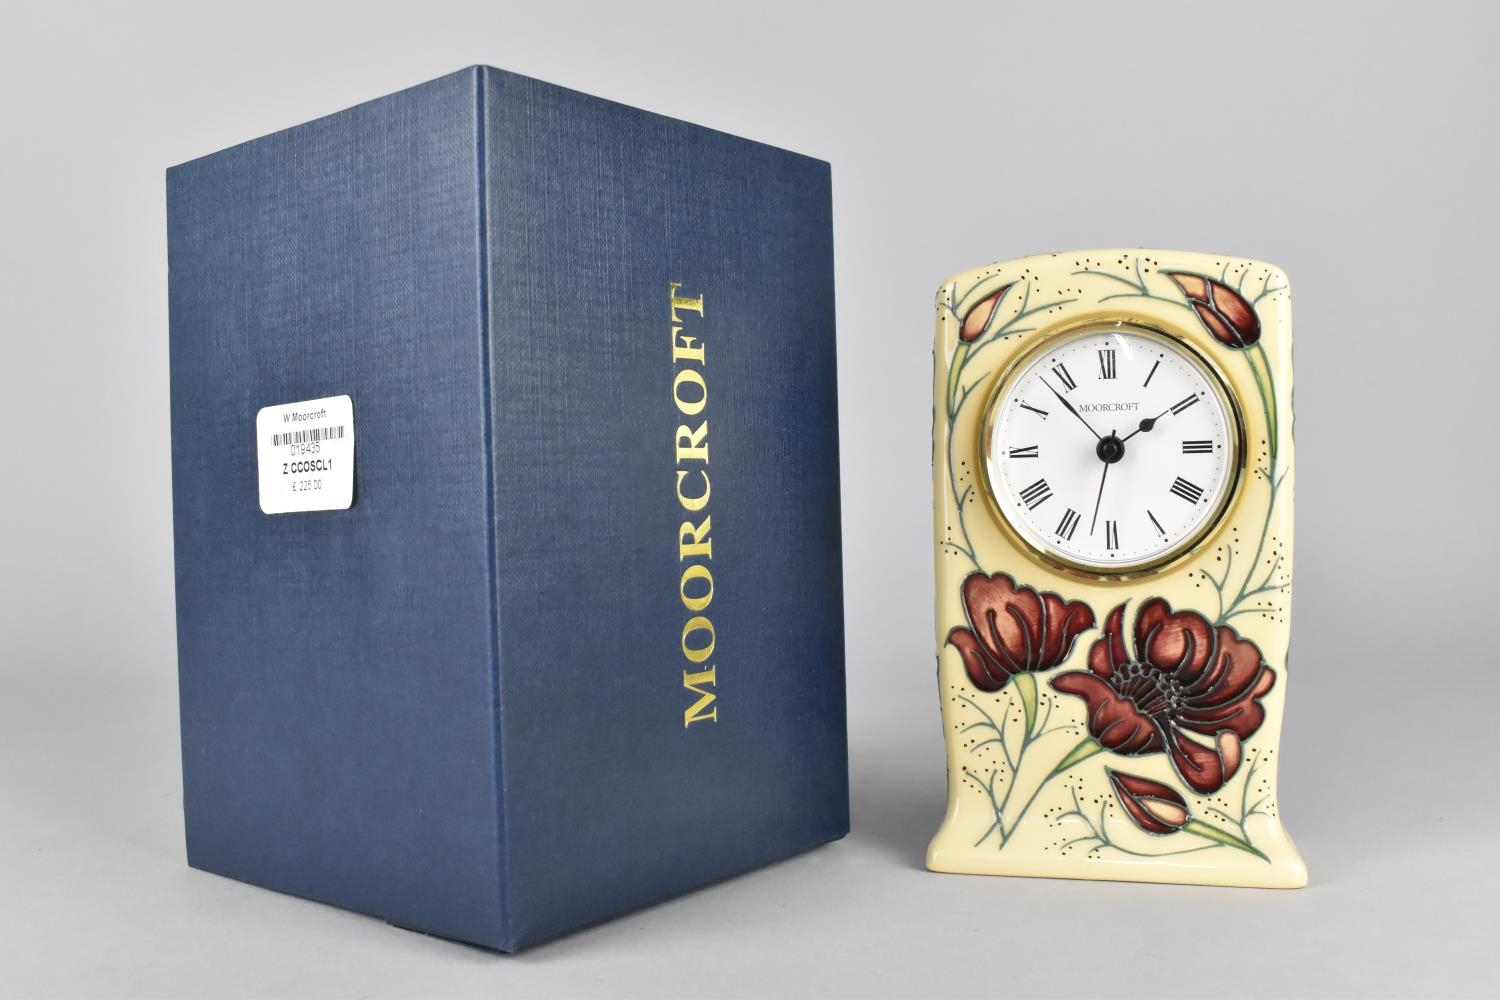 A Moorcroft Mantle Clock, Chocolate Cosmo Pattern, 2013, 15cm high, with Box - Image 4 of 4